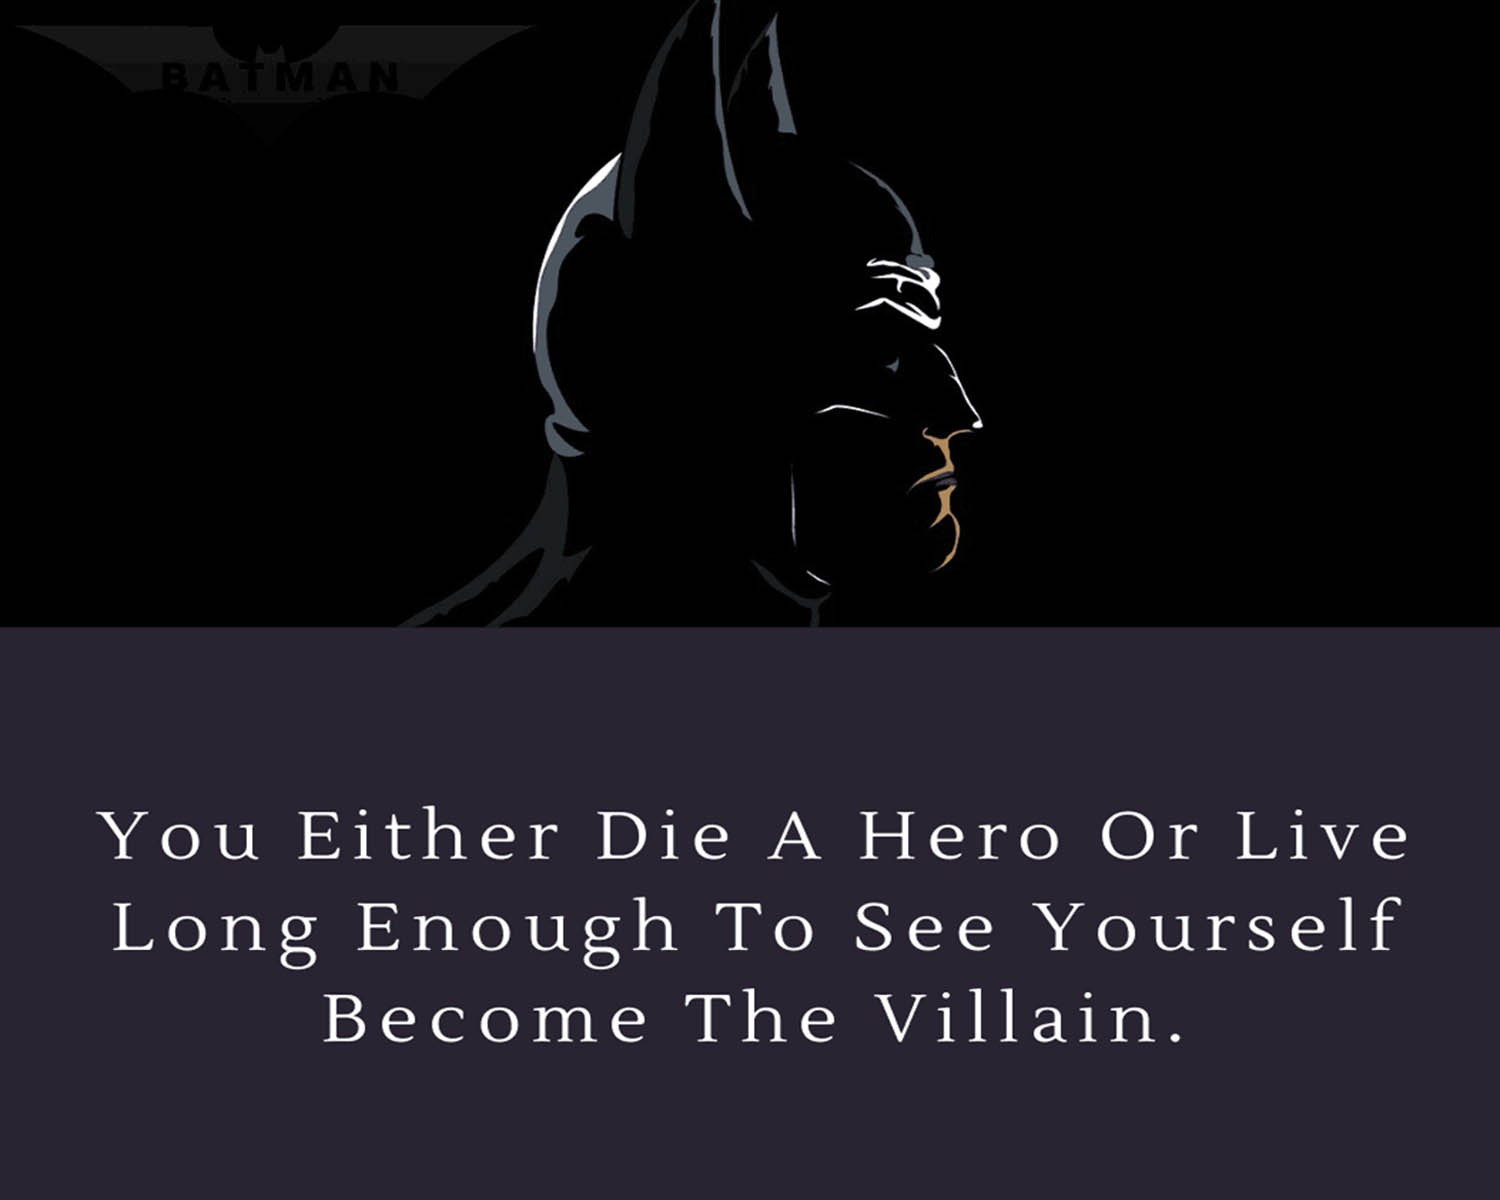 You Either Die A Hero Or Live Long Enough To Become The Villain: The Harsh Reality Of Heroism